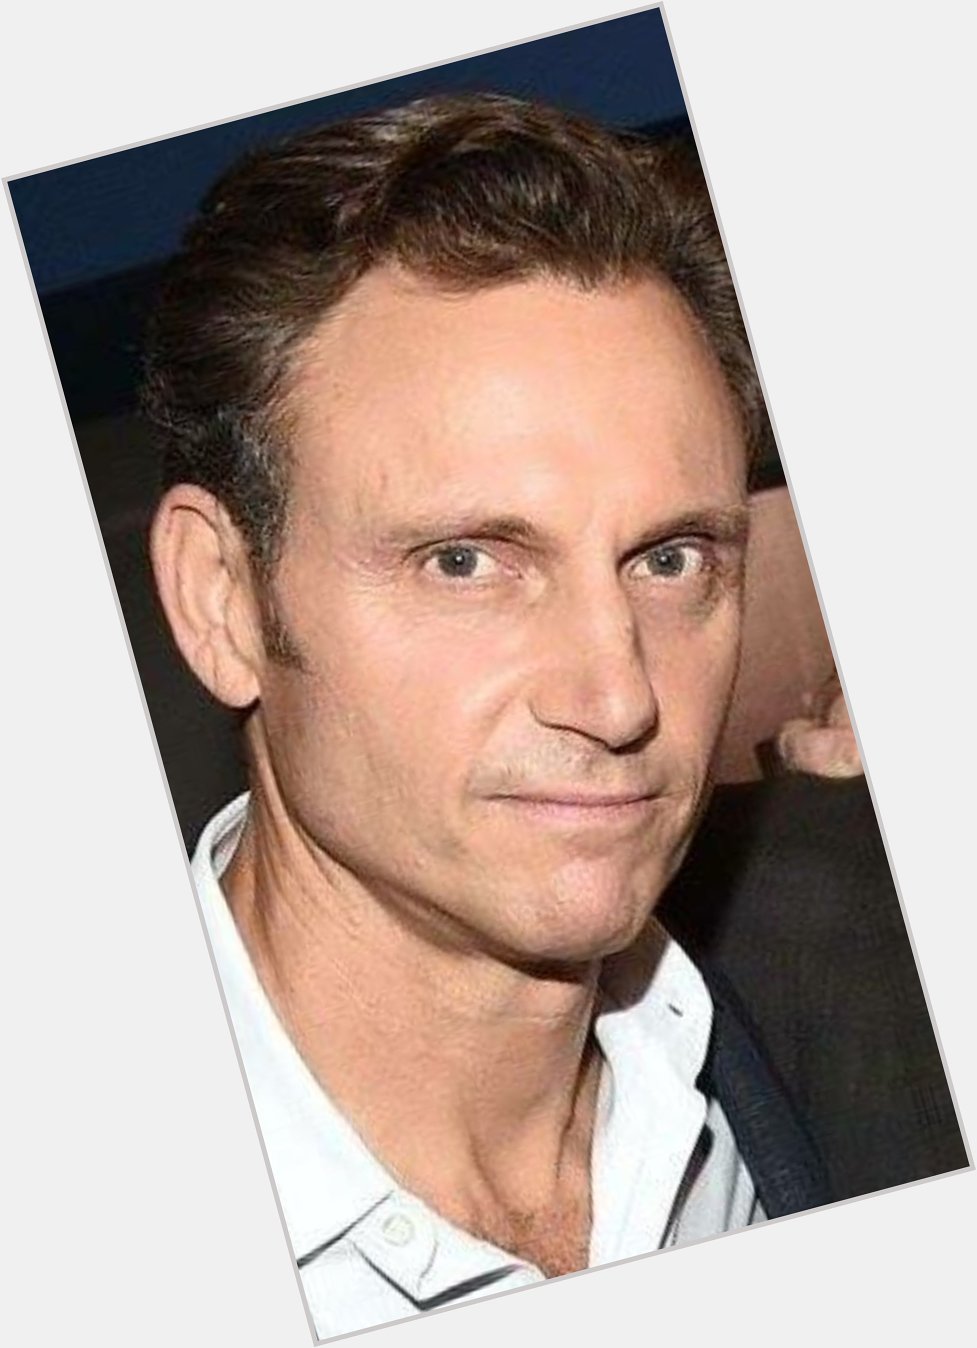 HAPPY BLESSED BIRTHDAY Tony Goldwyn! May you have many more!  